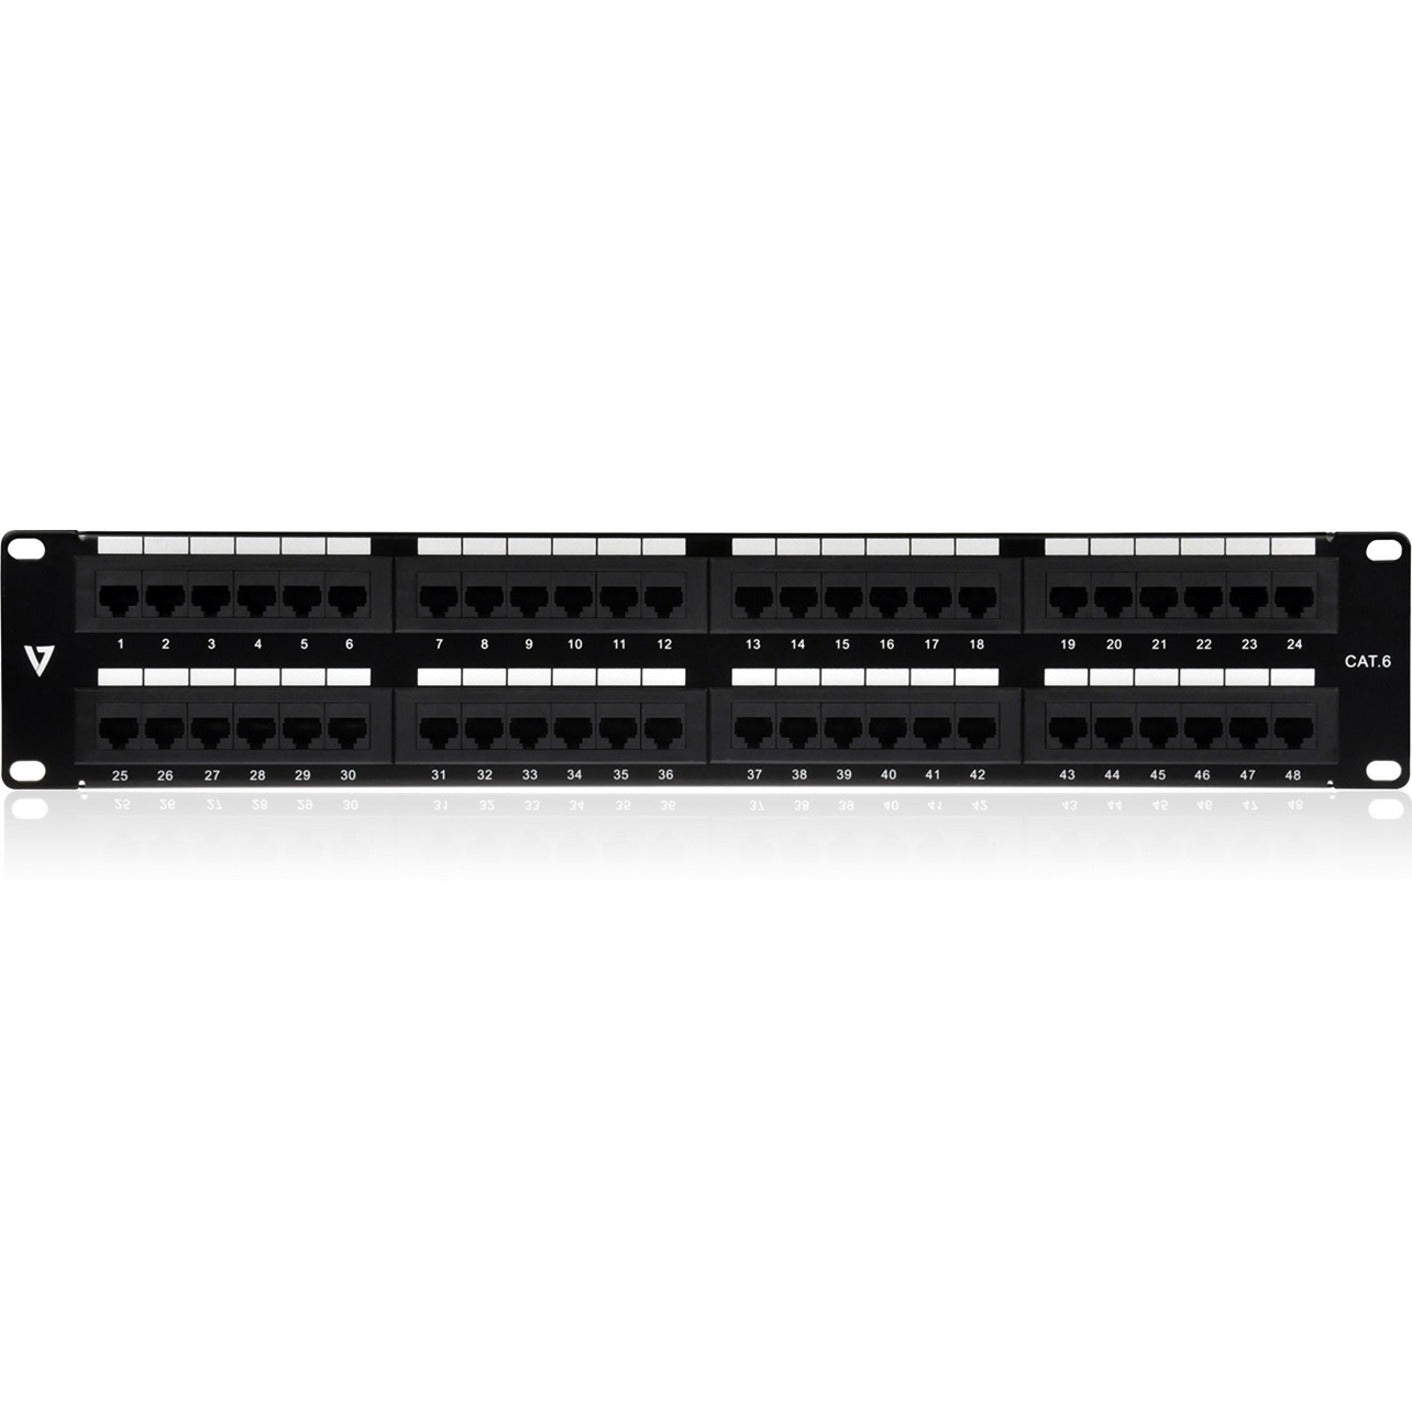 V7 48 Port Cat6 Patch Panel 2U - Network Patch Panel [Discontinued]